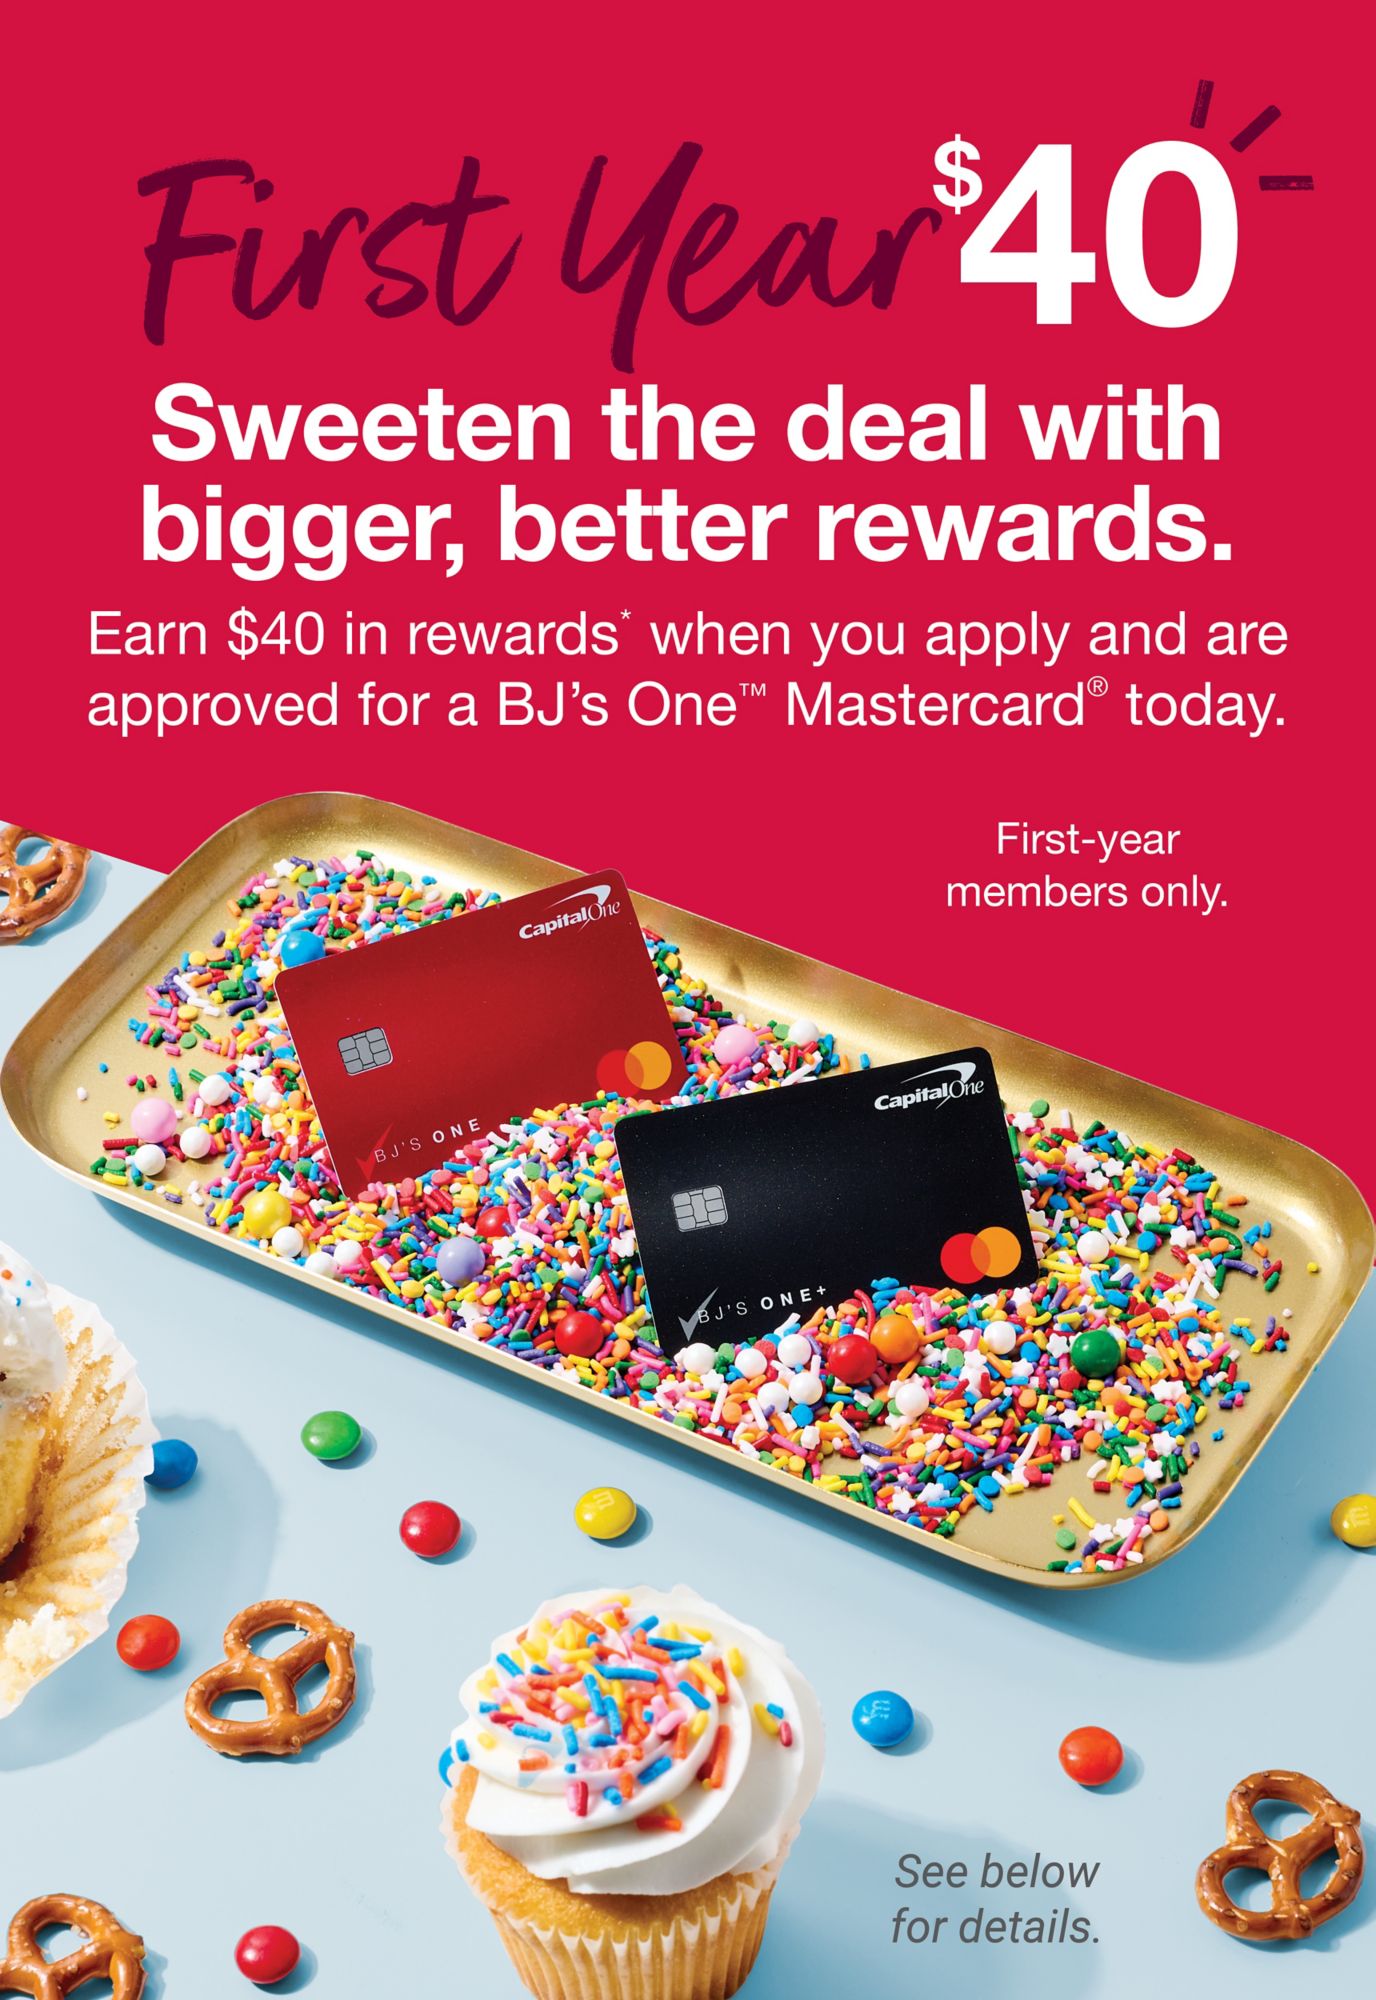 Apply today and earn $40 in rewards when you're approved for the BJ's One Mastercard.* Limited time only 10/28 - 11/5